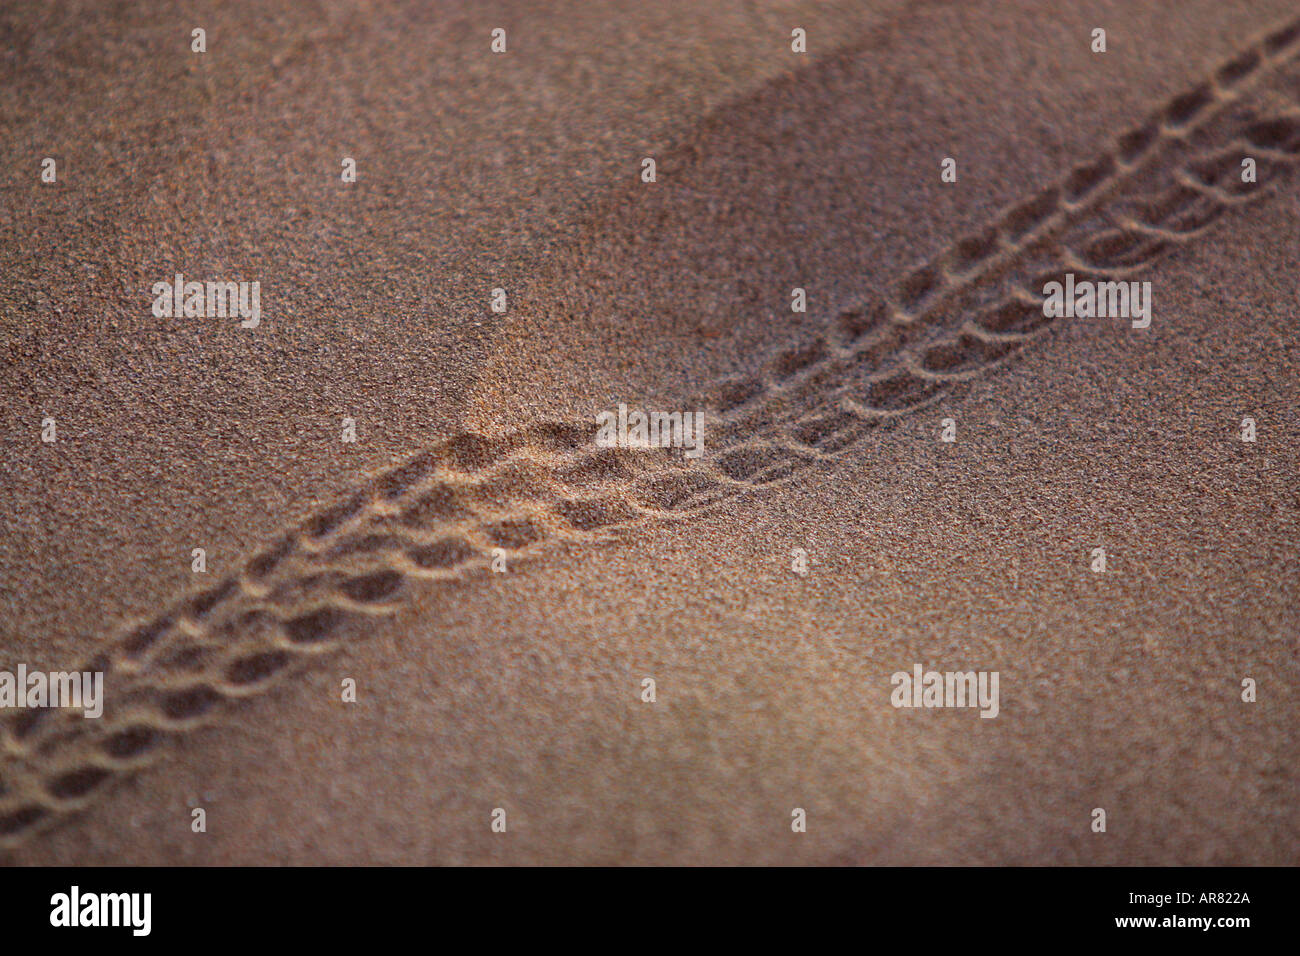 Tracks left in sand by hermit crab Stock Photo